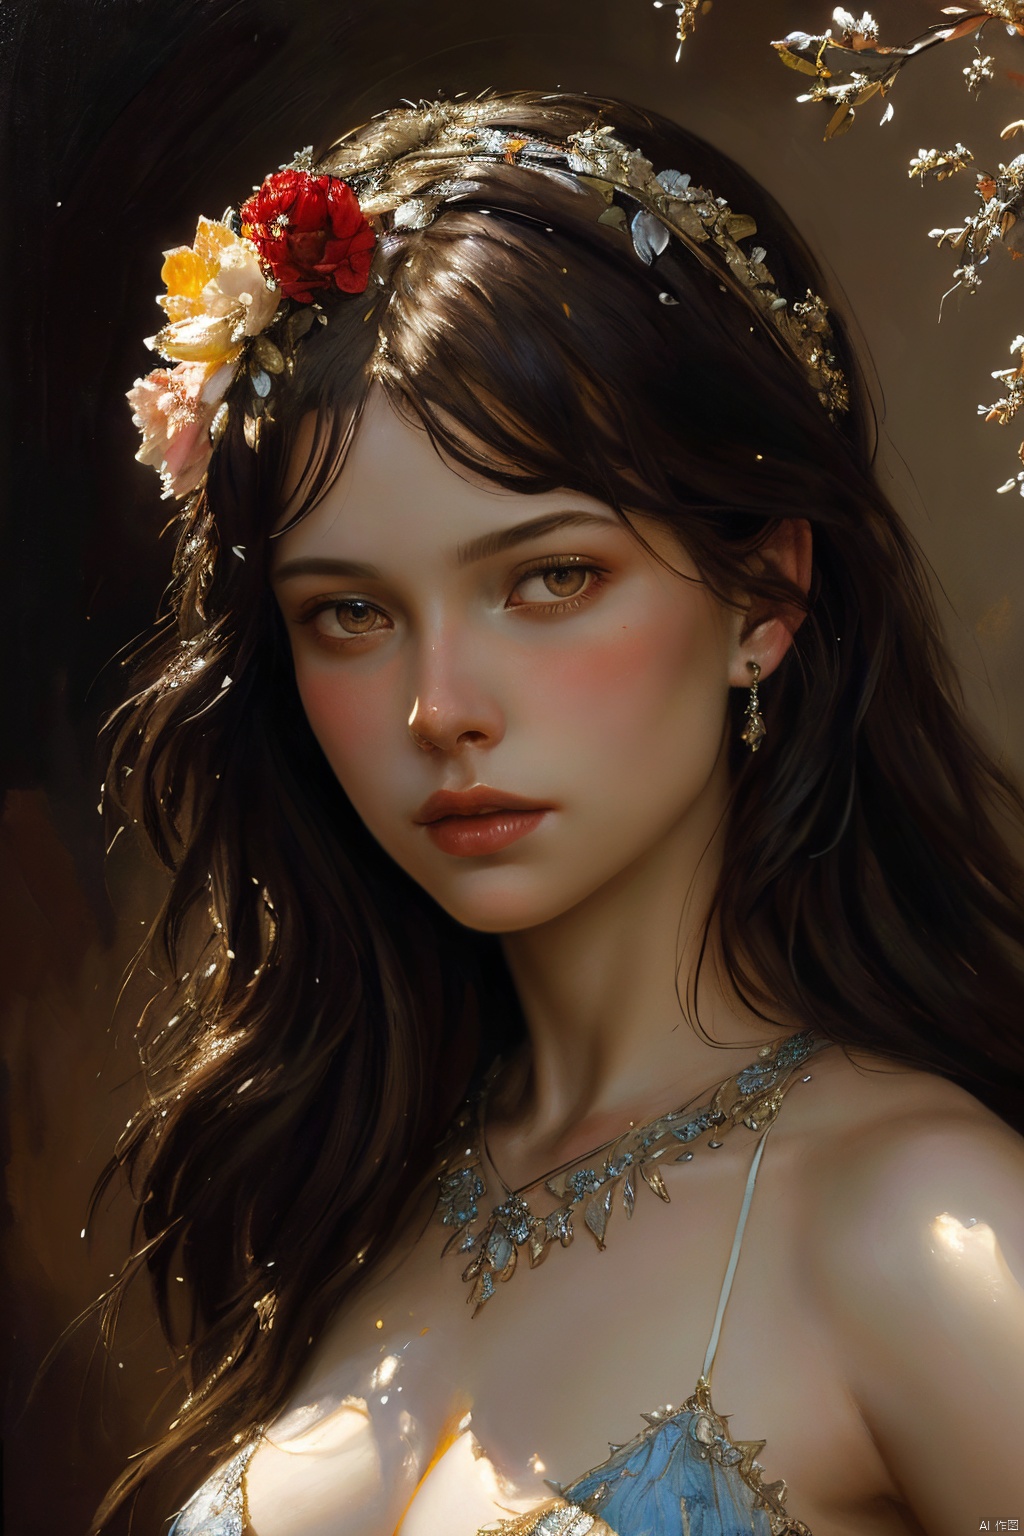  ((amazing quality, award winning, intricately detailed, ultra realistic, extremely detailed 8K)), ((oil painting by Henry Asencio)) portrait of fairy, floral headband, faded art